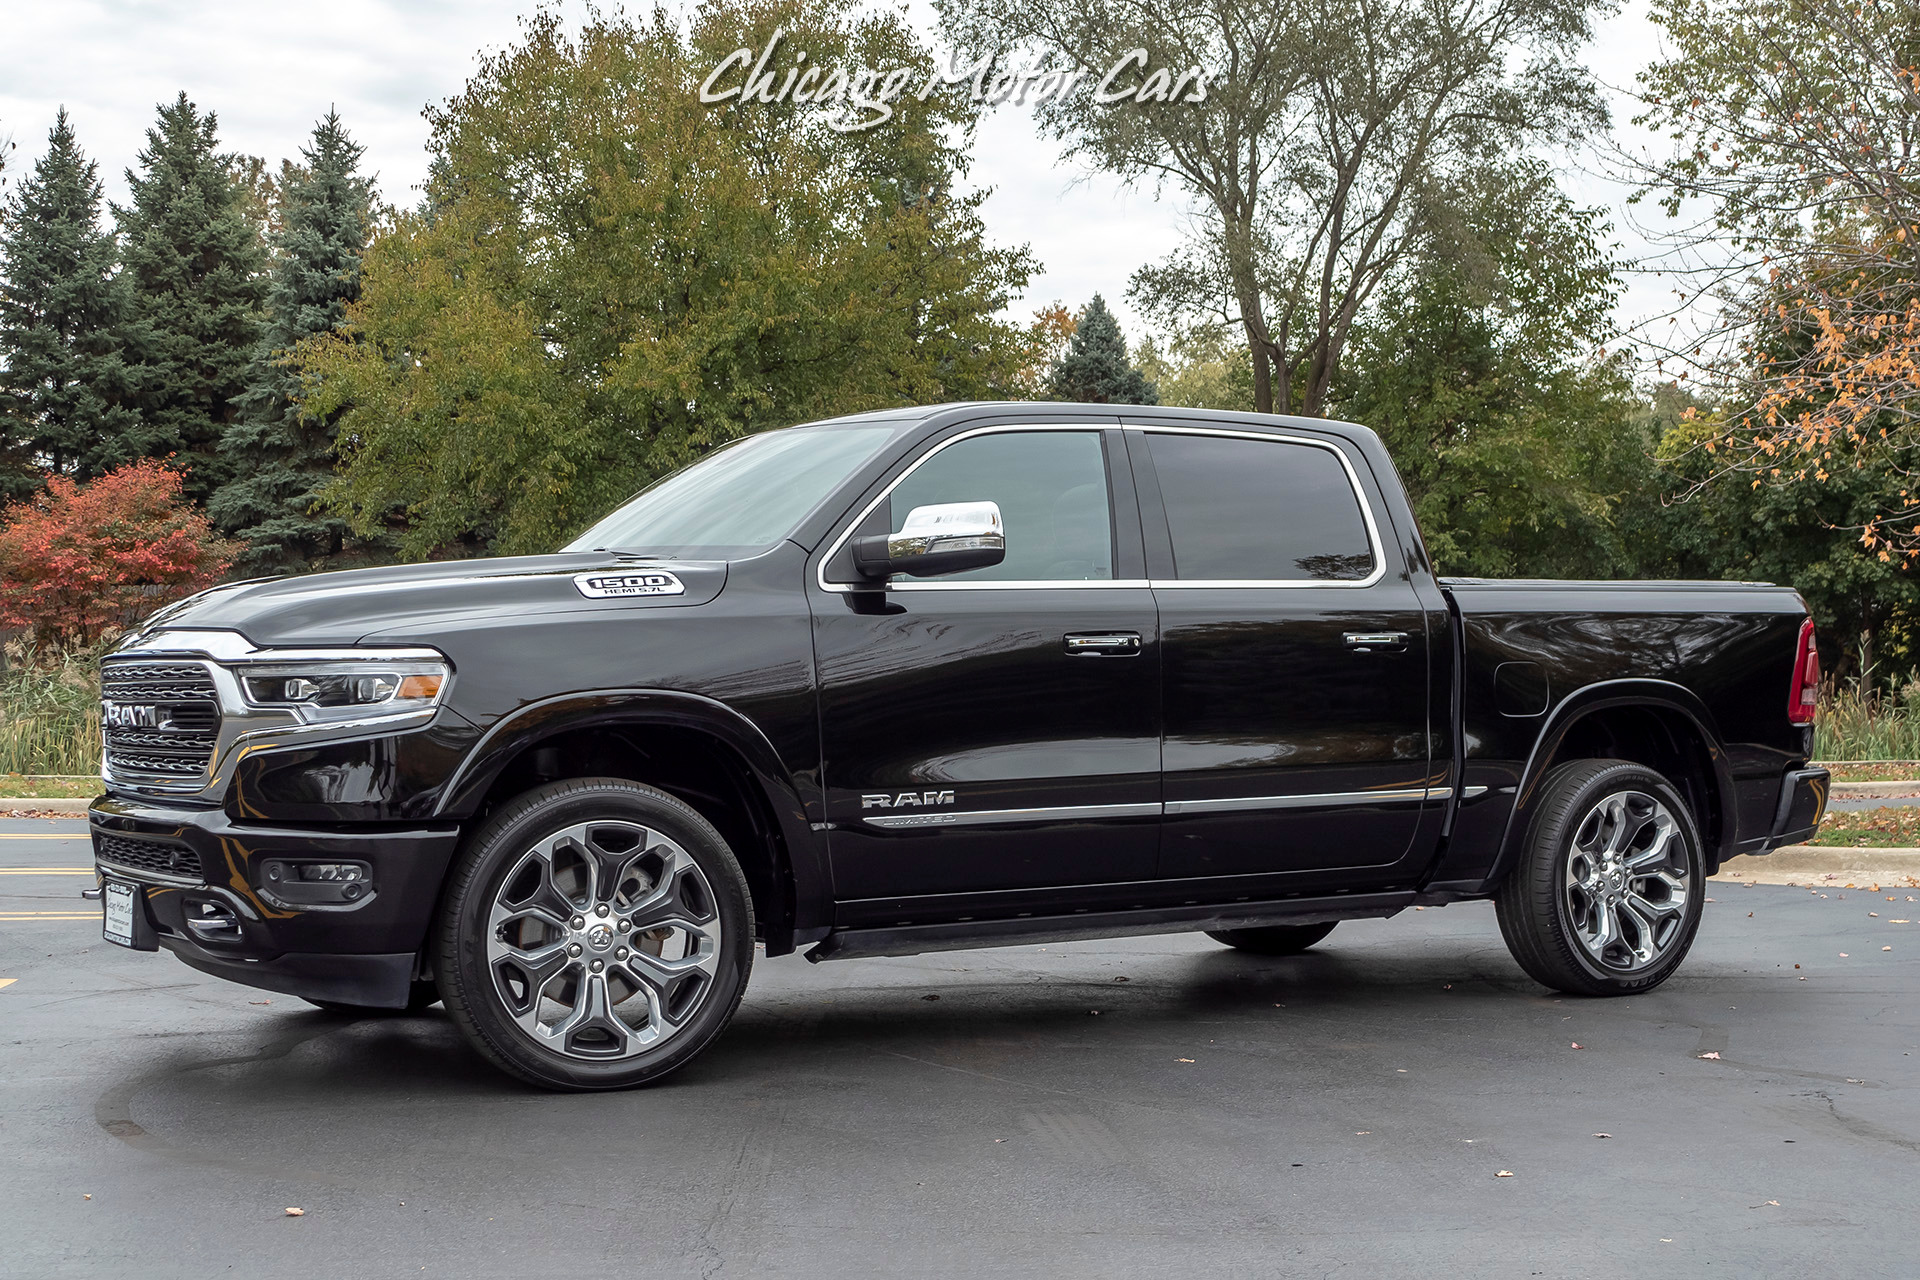 Used-2019-Ram-1500-Limited-Crew-Cab-4x4-Pick-Up-Truck-MSRP-64K-HEMI-V8-LOW-MILES